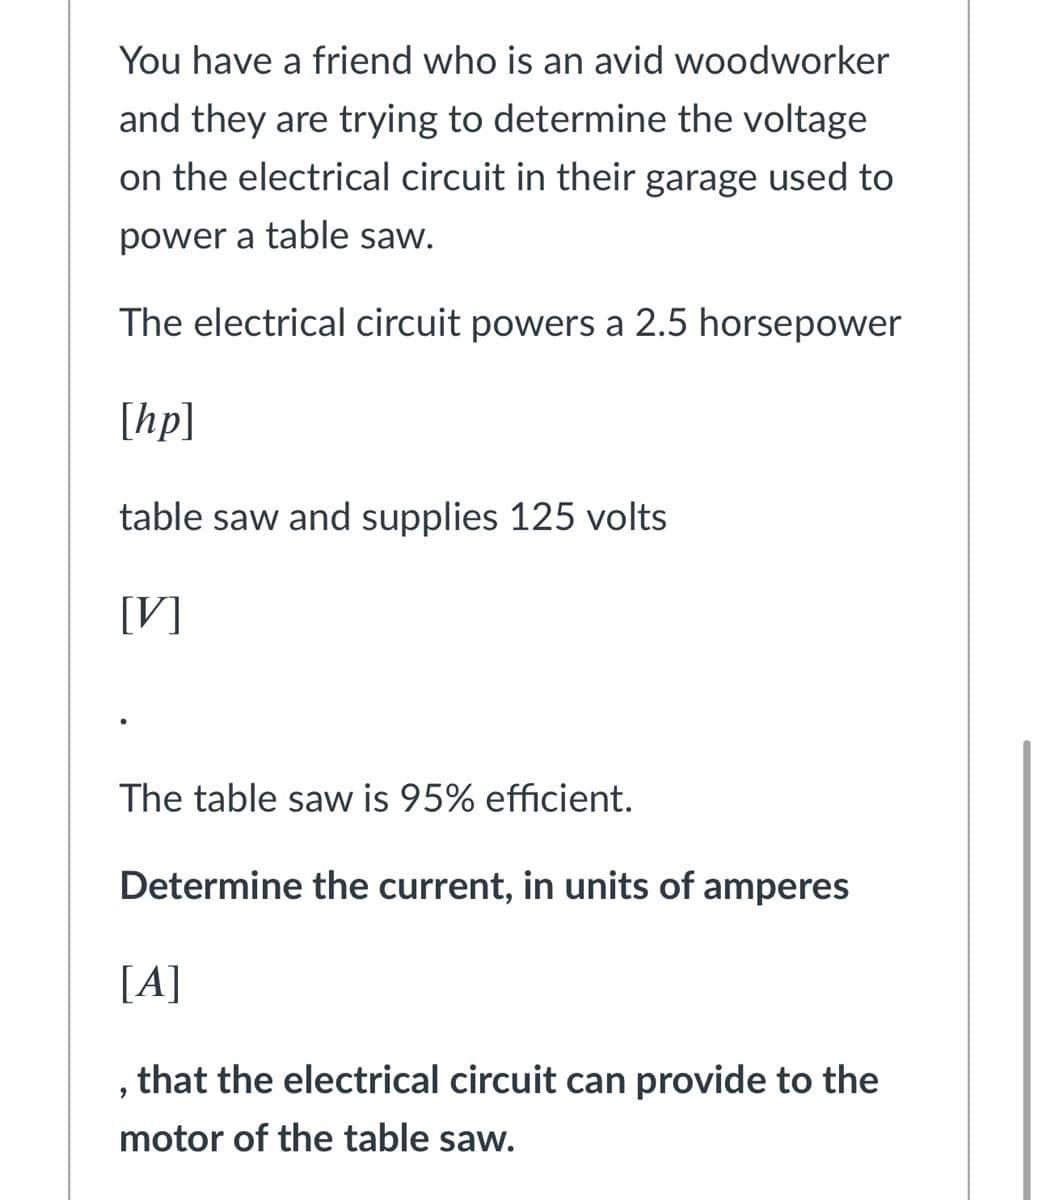 You have a friend who is an avid woodworker
and they are trying to determine the voltage
on the electrical circuit in their garage used to
power a table saw.
The electrical circuit powers a 2.5 horsepower
[hp]
table saw and supplies 125 volts
[V]
The table saw is 95% efficient.
Determine the current, in units of amperes
[A]
that the electrical circuit can provide to the
motor of the table saw.
